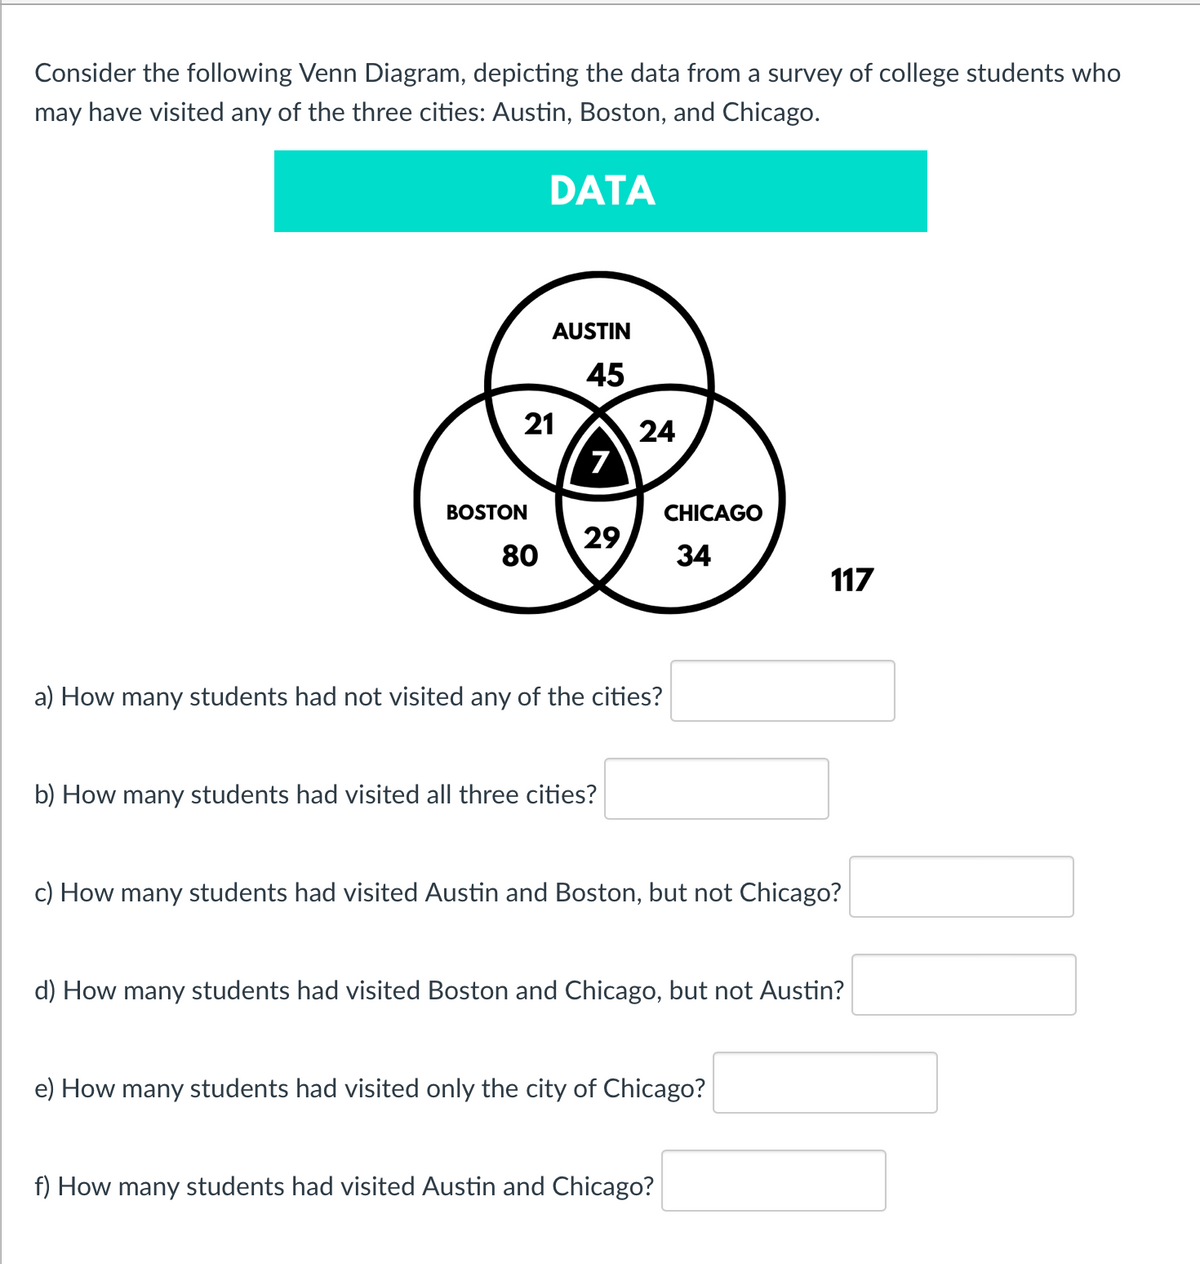 Consider the following Venn Diagram, depicting the data from a survey of college students who
may have visited any of the three cities: Austin, Boston, and Chicago.
DATA
21
BOSTON
AUSTIN
45
80
7
29
24
a) How many students had not visited any of the cities?
b) How many students had visited all three cities?
CHICAGO
34
c) How many students had visited Austin and Boston, but not Chicago?
117
d) How many students had visited Boston and Chicago, but not Austin?
e) How many students had visited only the city of Chicago?
f) How many students had visited Austin and Chicago?